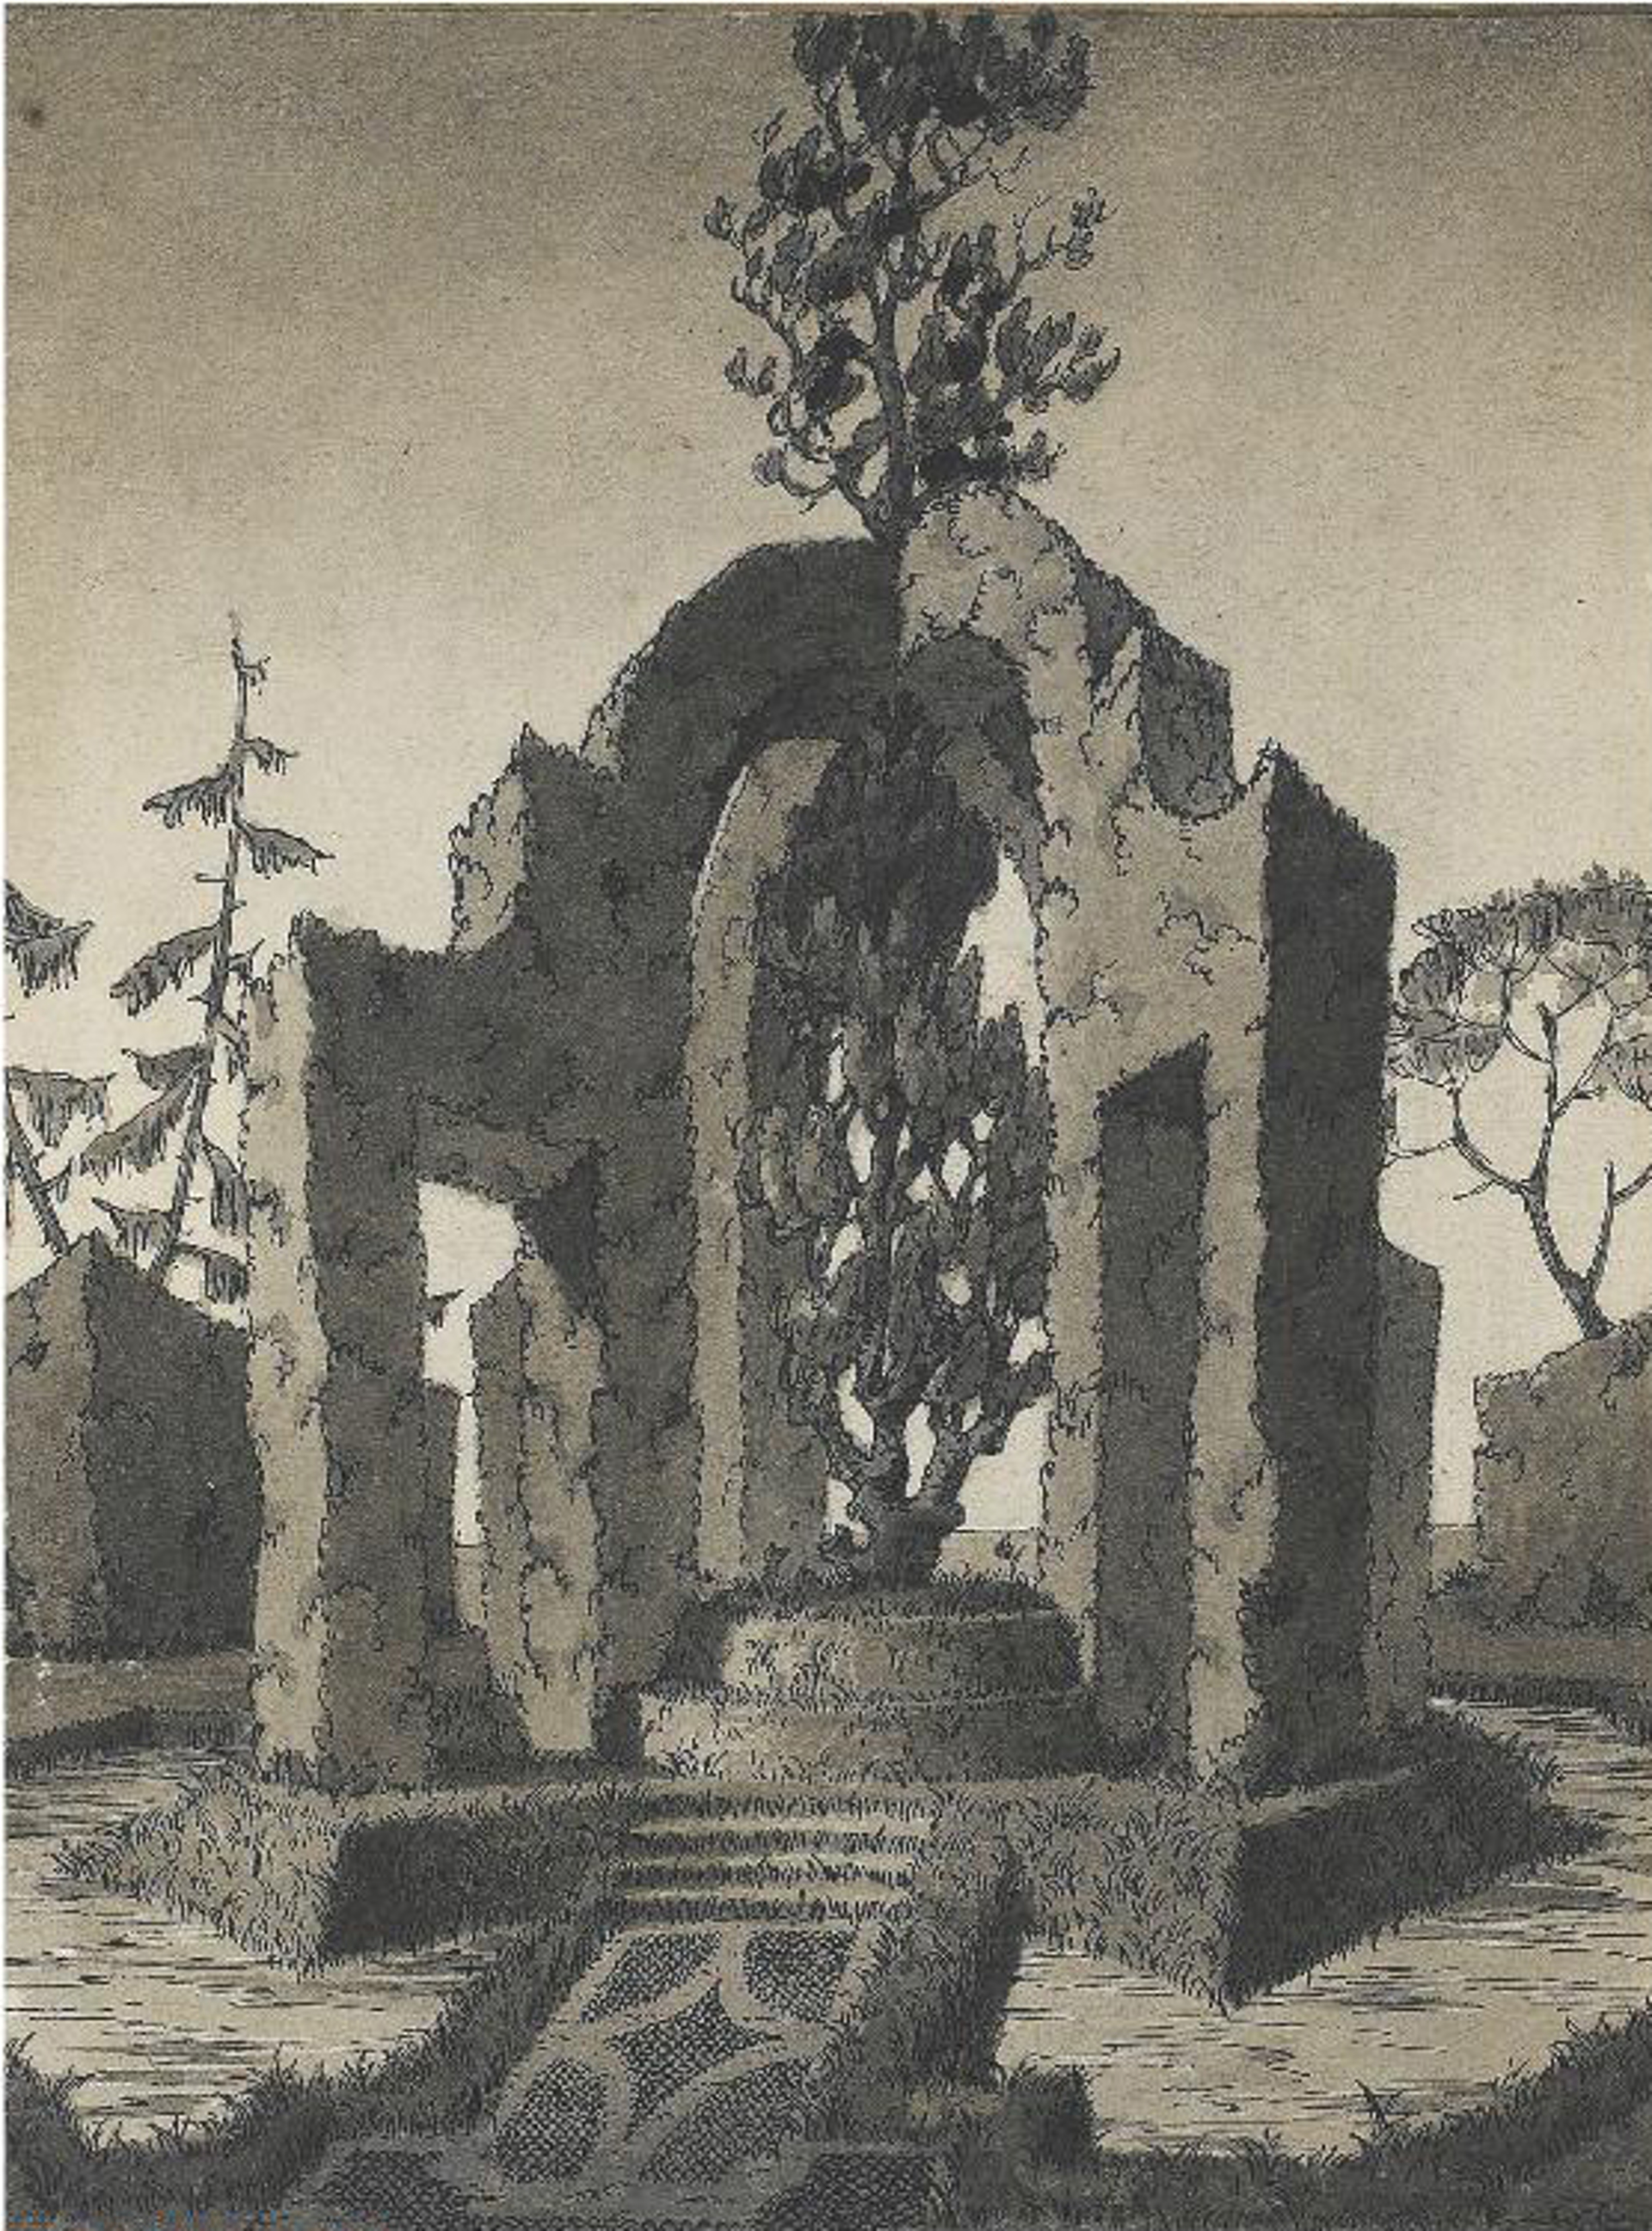 DRAWING OF A TOPIARY IN THE SHAPE OF AN ARCHED MONUMENT by Emilio Terry